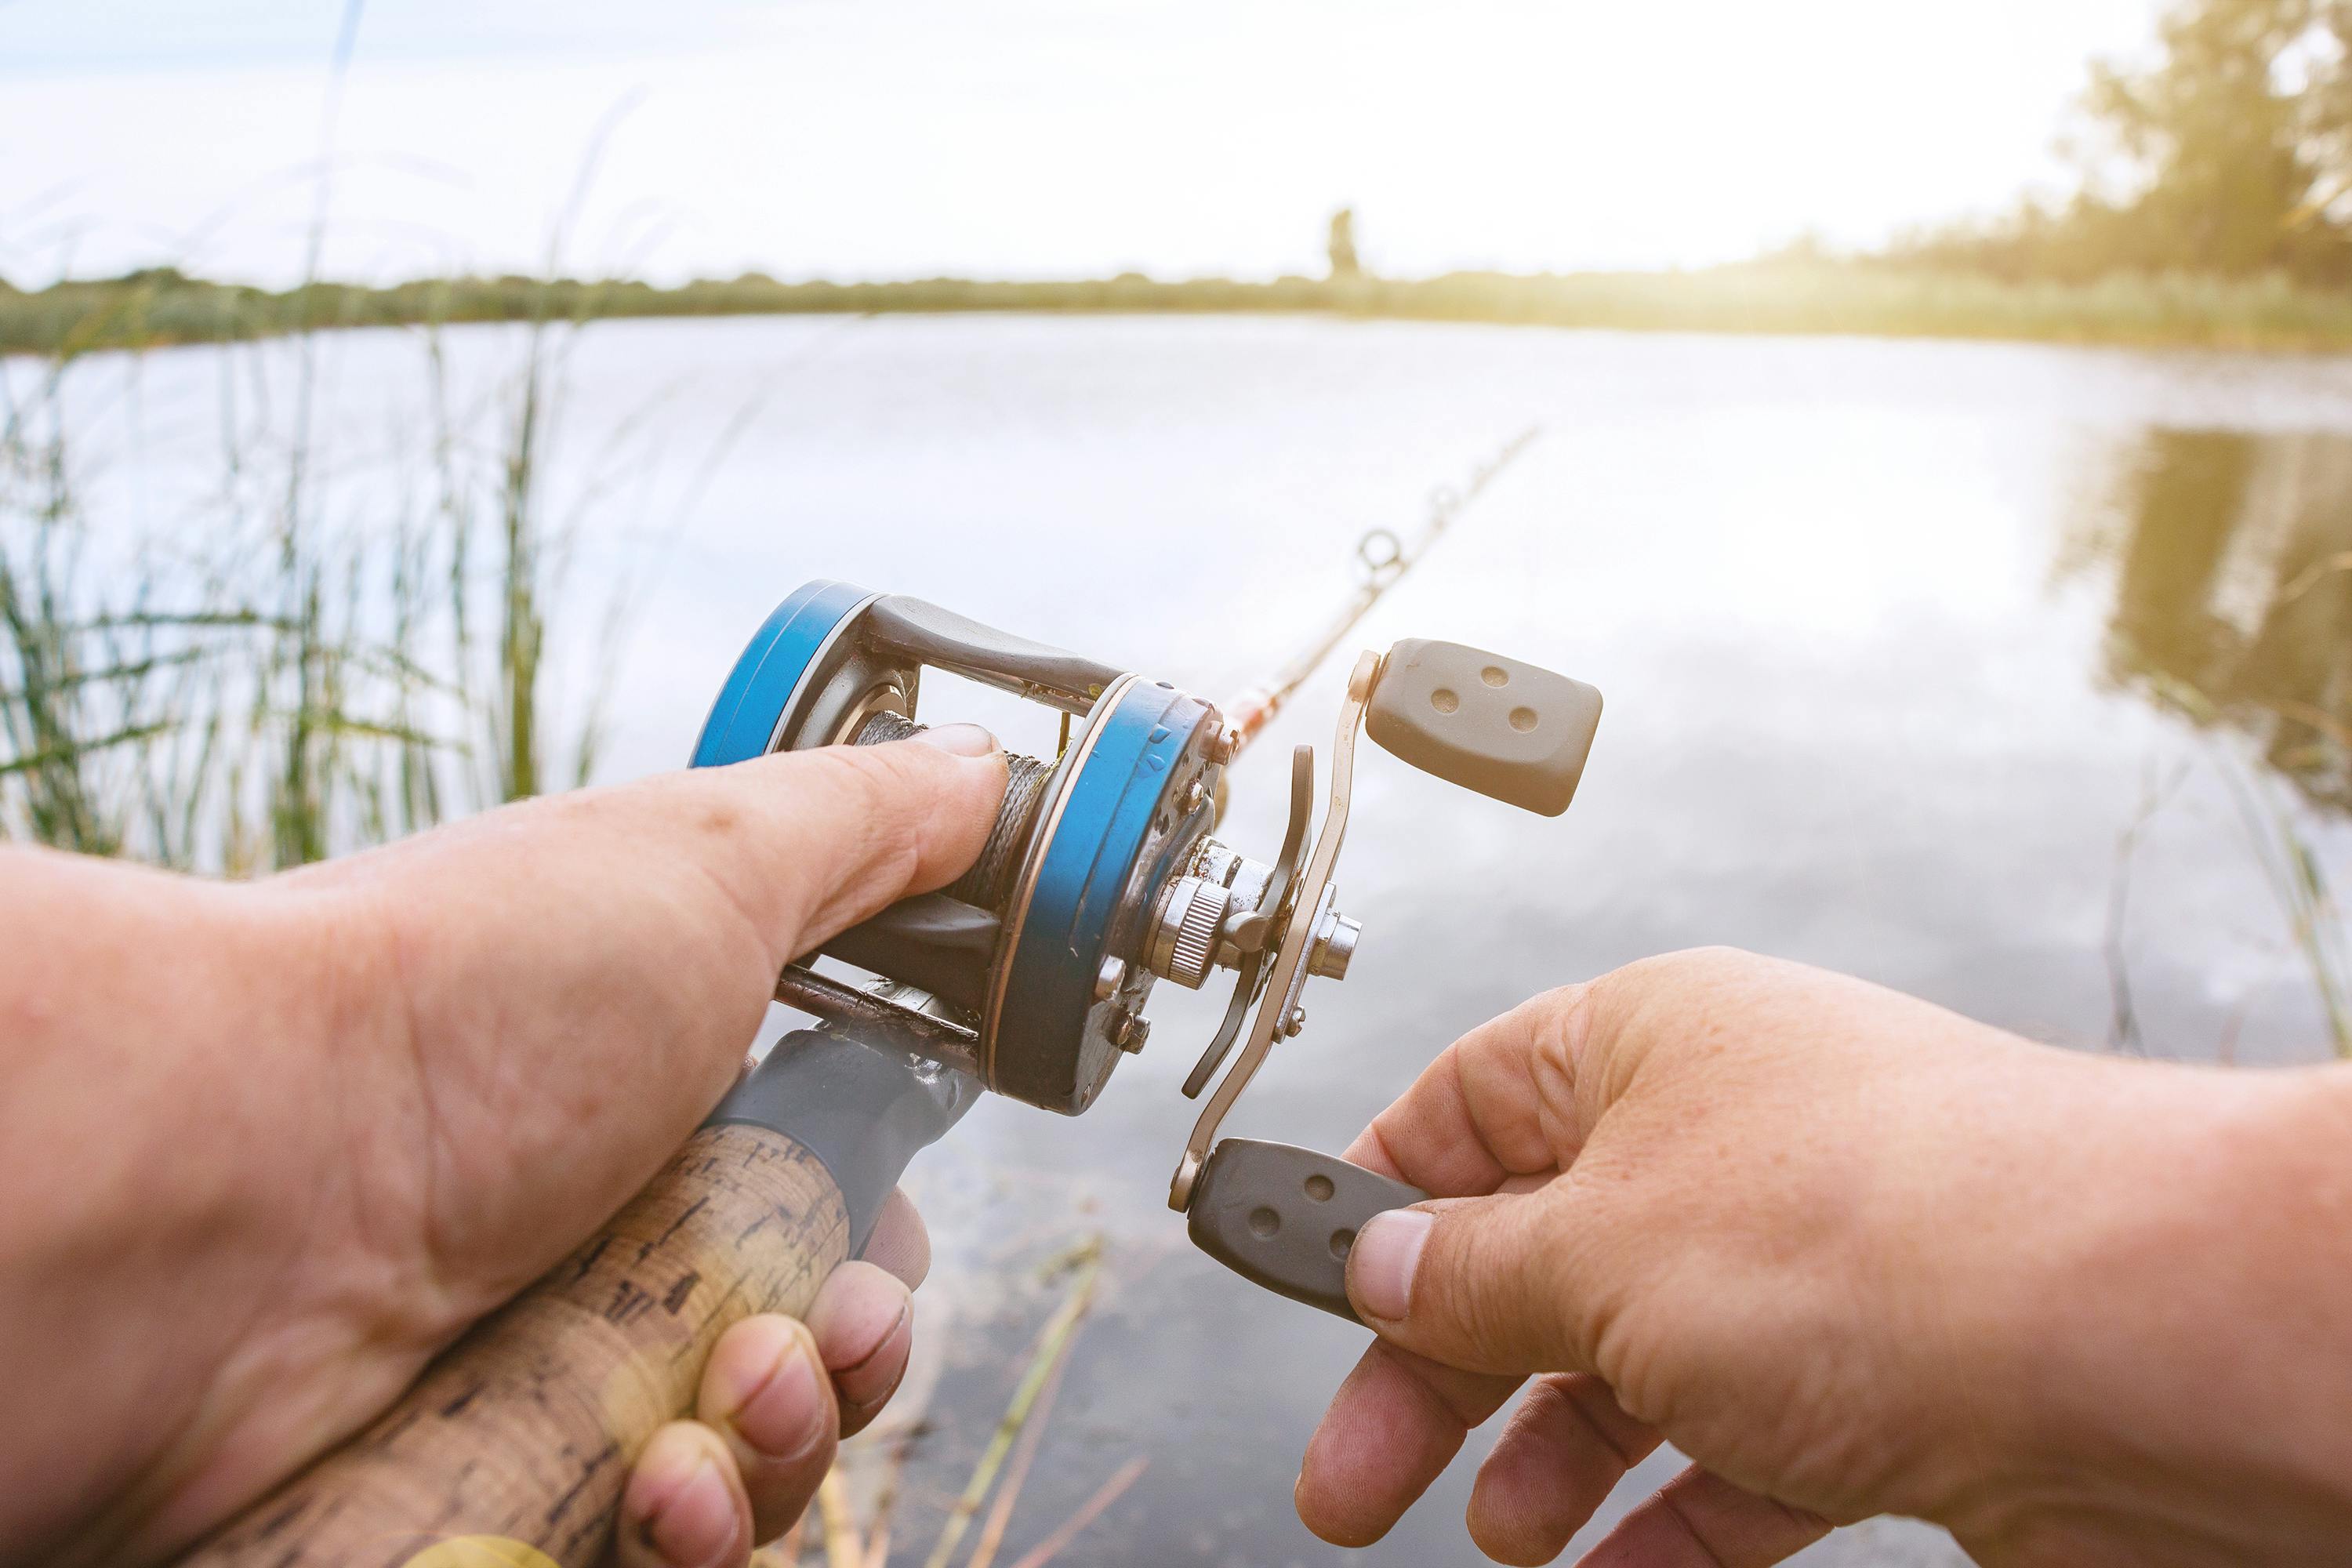 Beware backlash: Baitcaster battles can be avoided with care, Outdoors